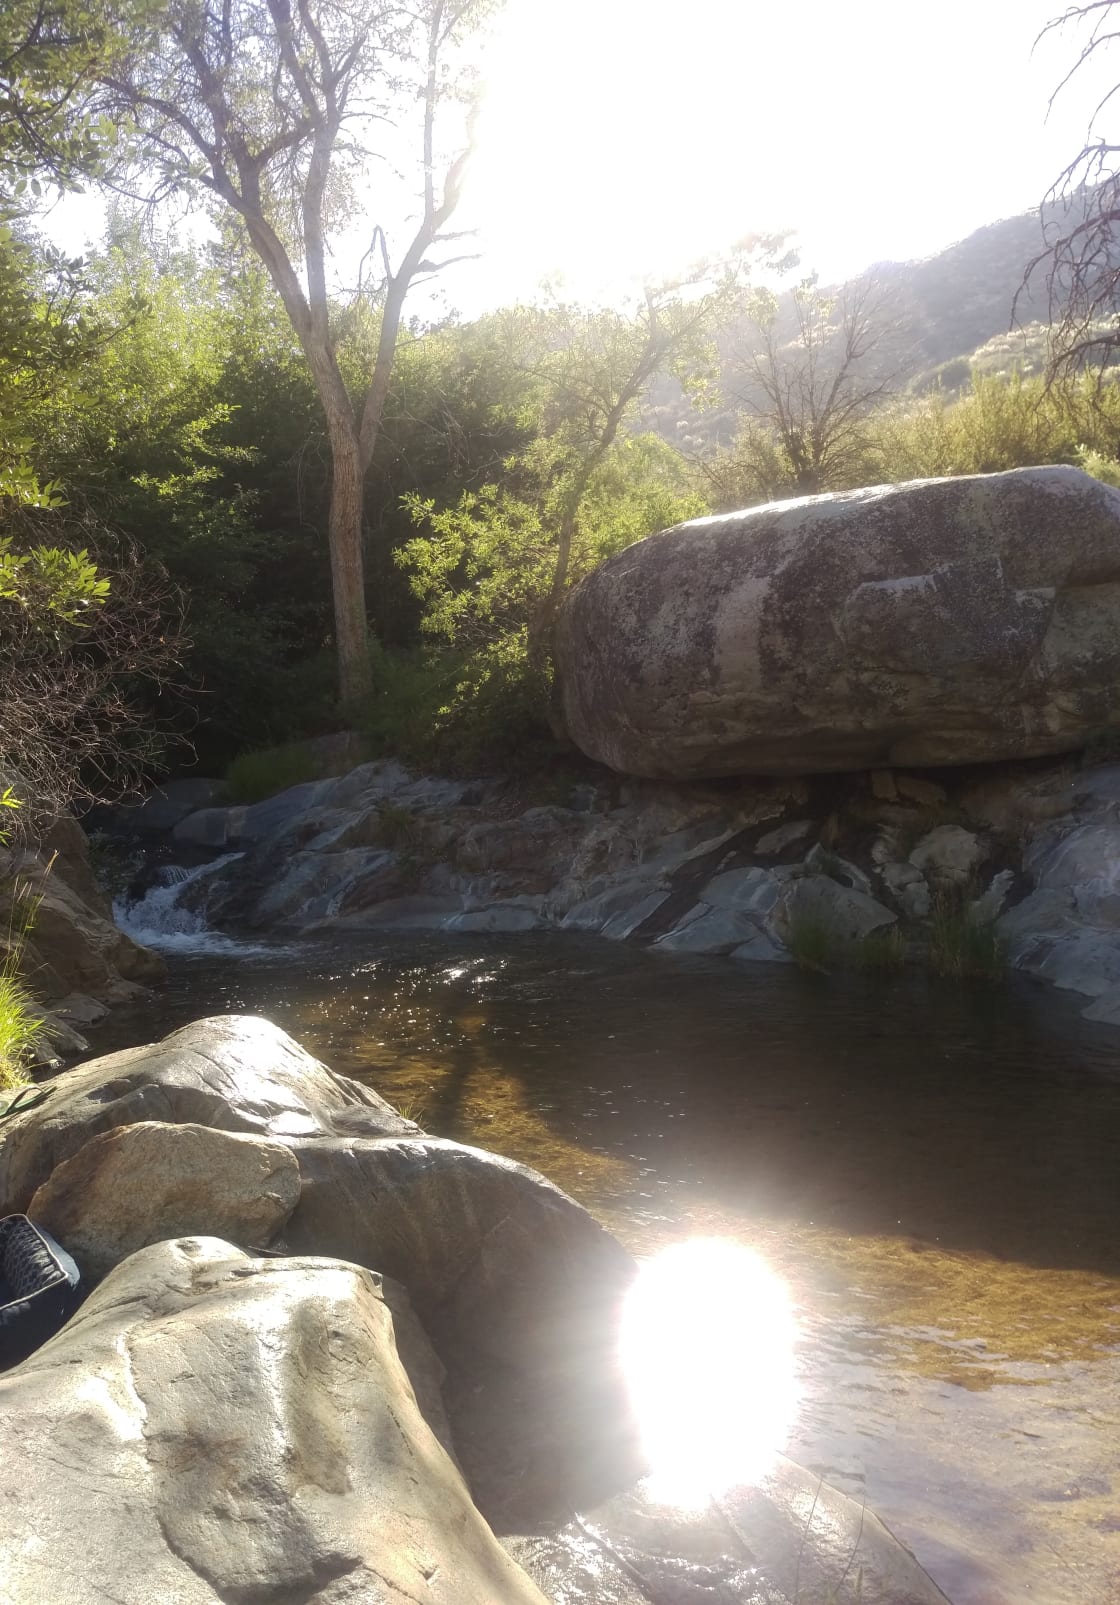 Beautiful morning at the headwaters of the Kern River, Brush Creek Campsite.